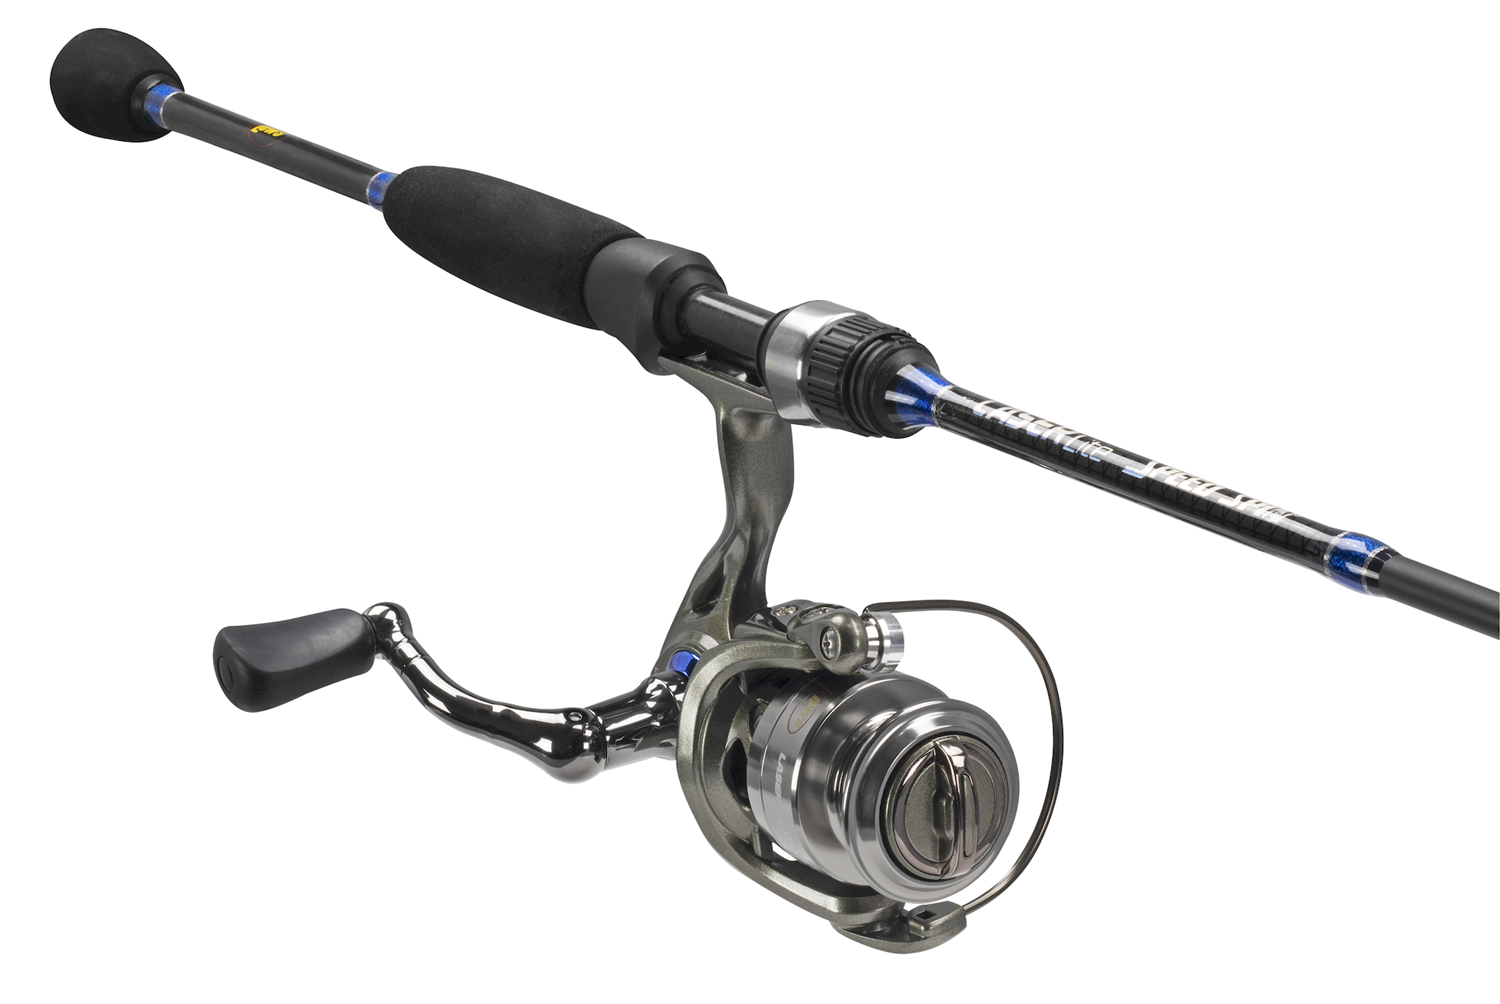  Lew's (LLS10066UL-2) Laser Lite Spinning Reel and